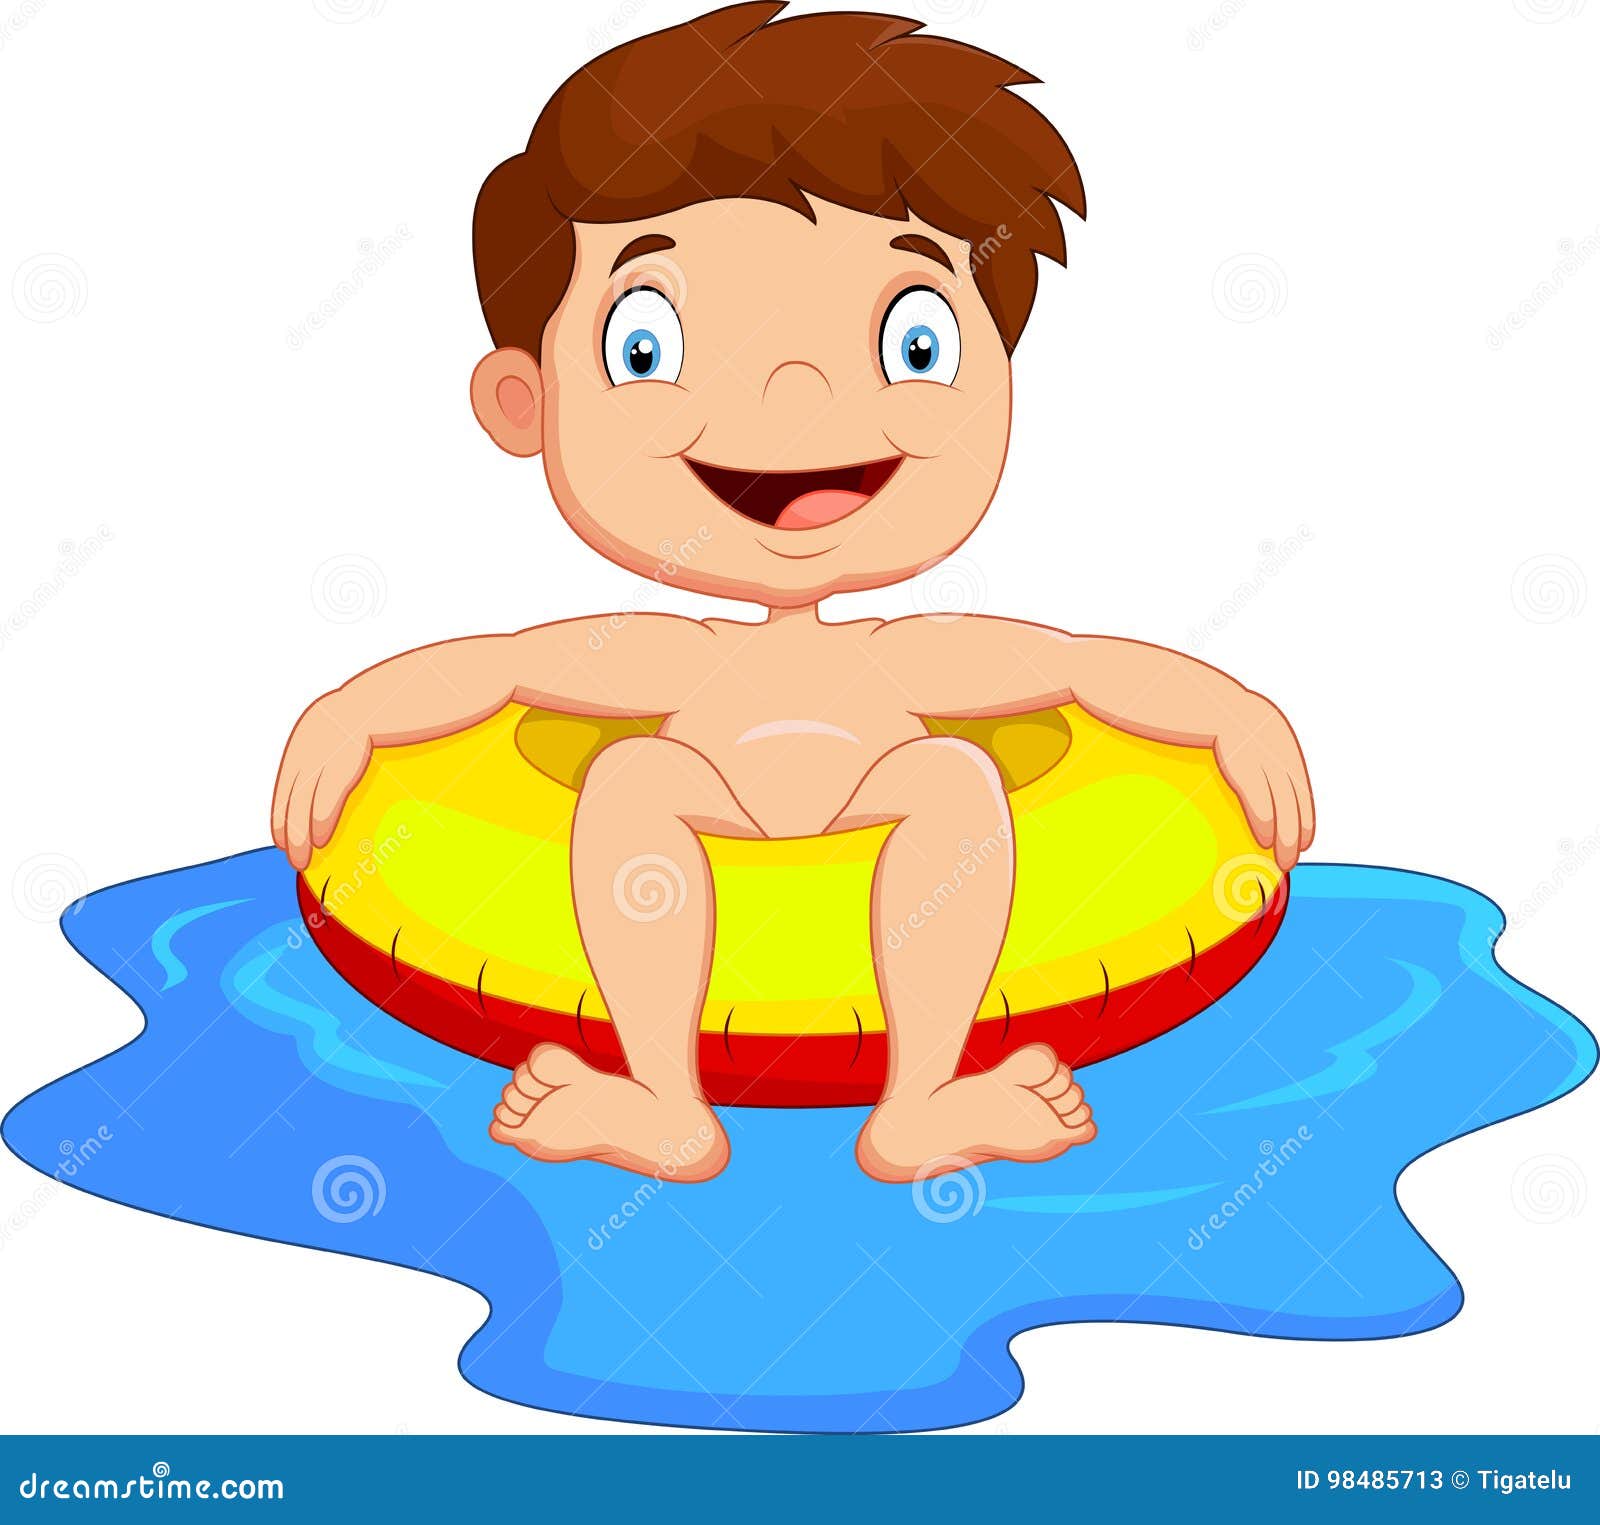 Young Kid Having Fun in Swimming Pool Stock Vector - Illustration of ...